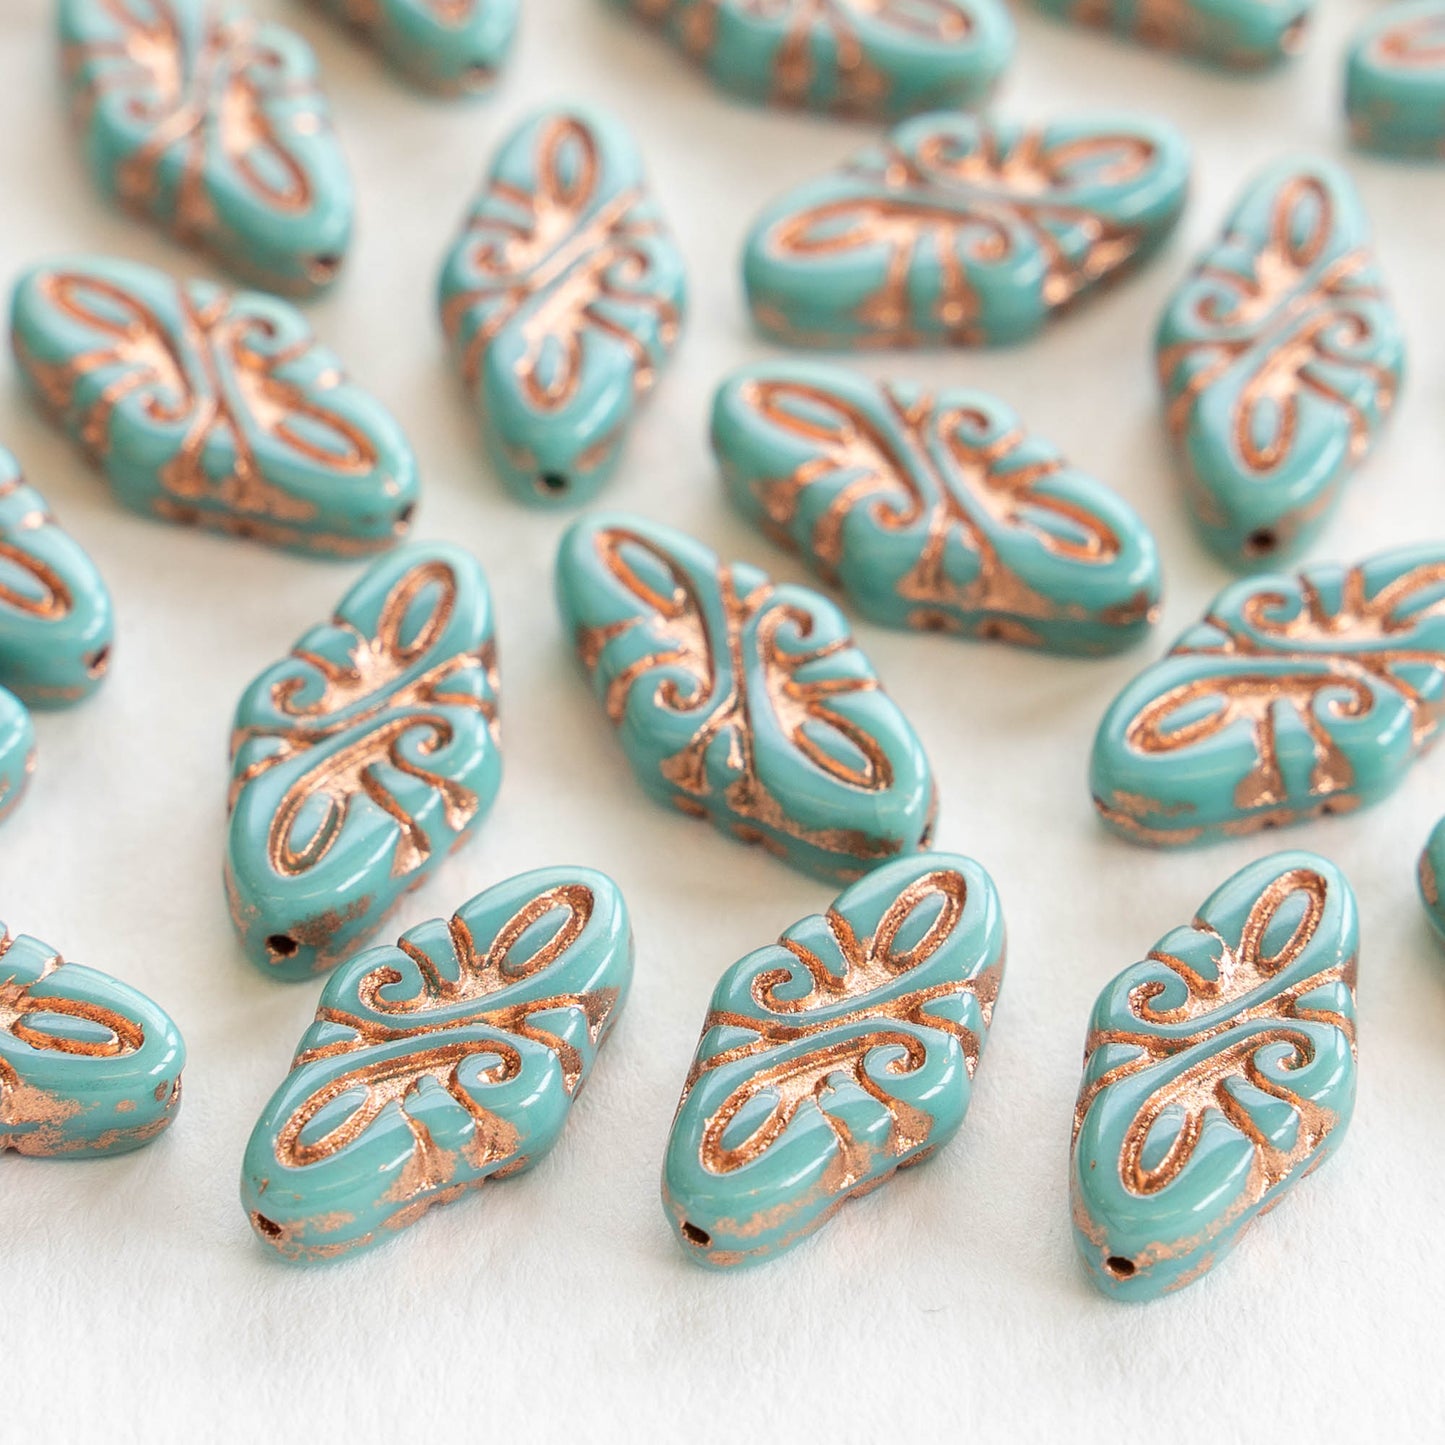 9x19mm Arabesque Beads - Turquoise with Bronze Wash